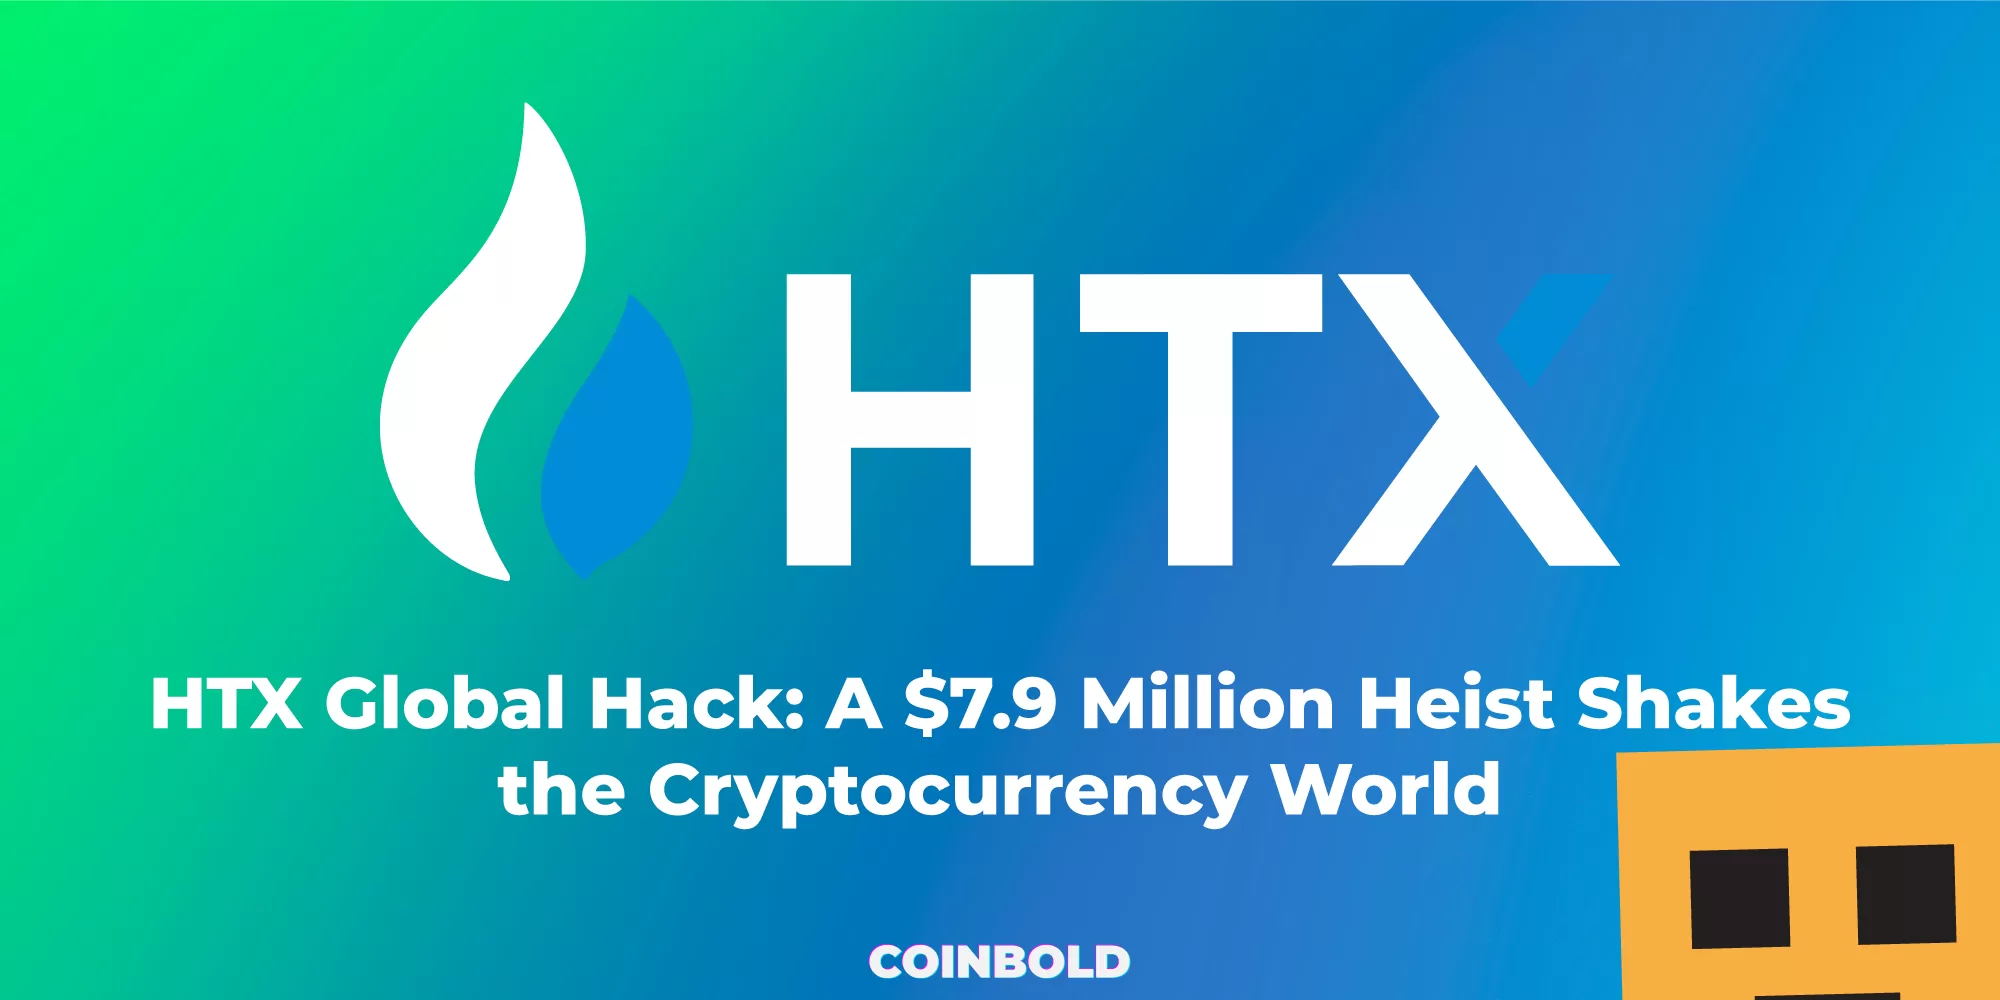 HTX Global Hack A $7.9 Million Heist Shakes the Cryptocurrency World